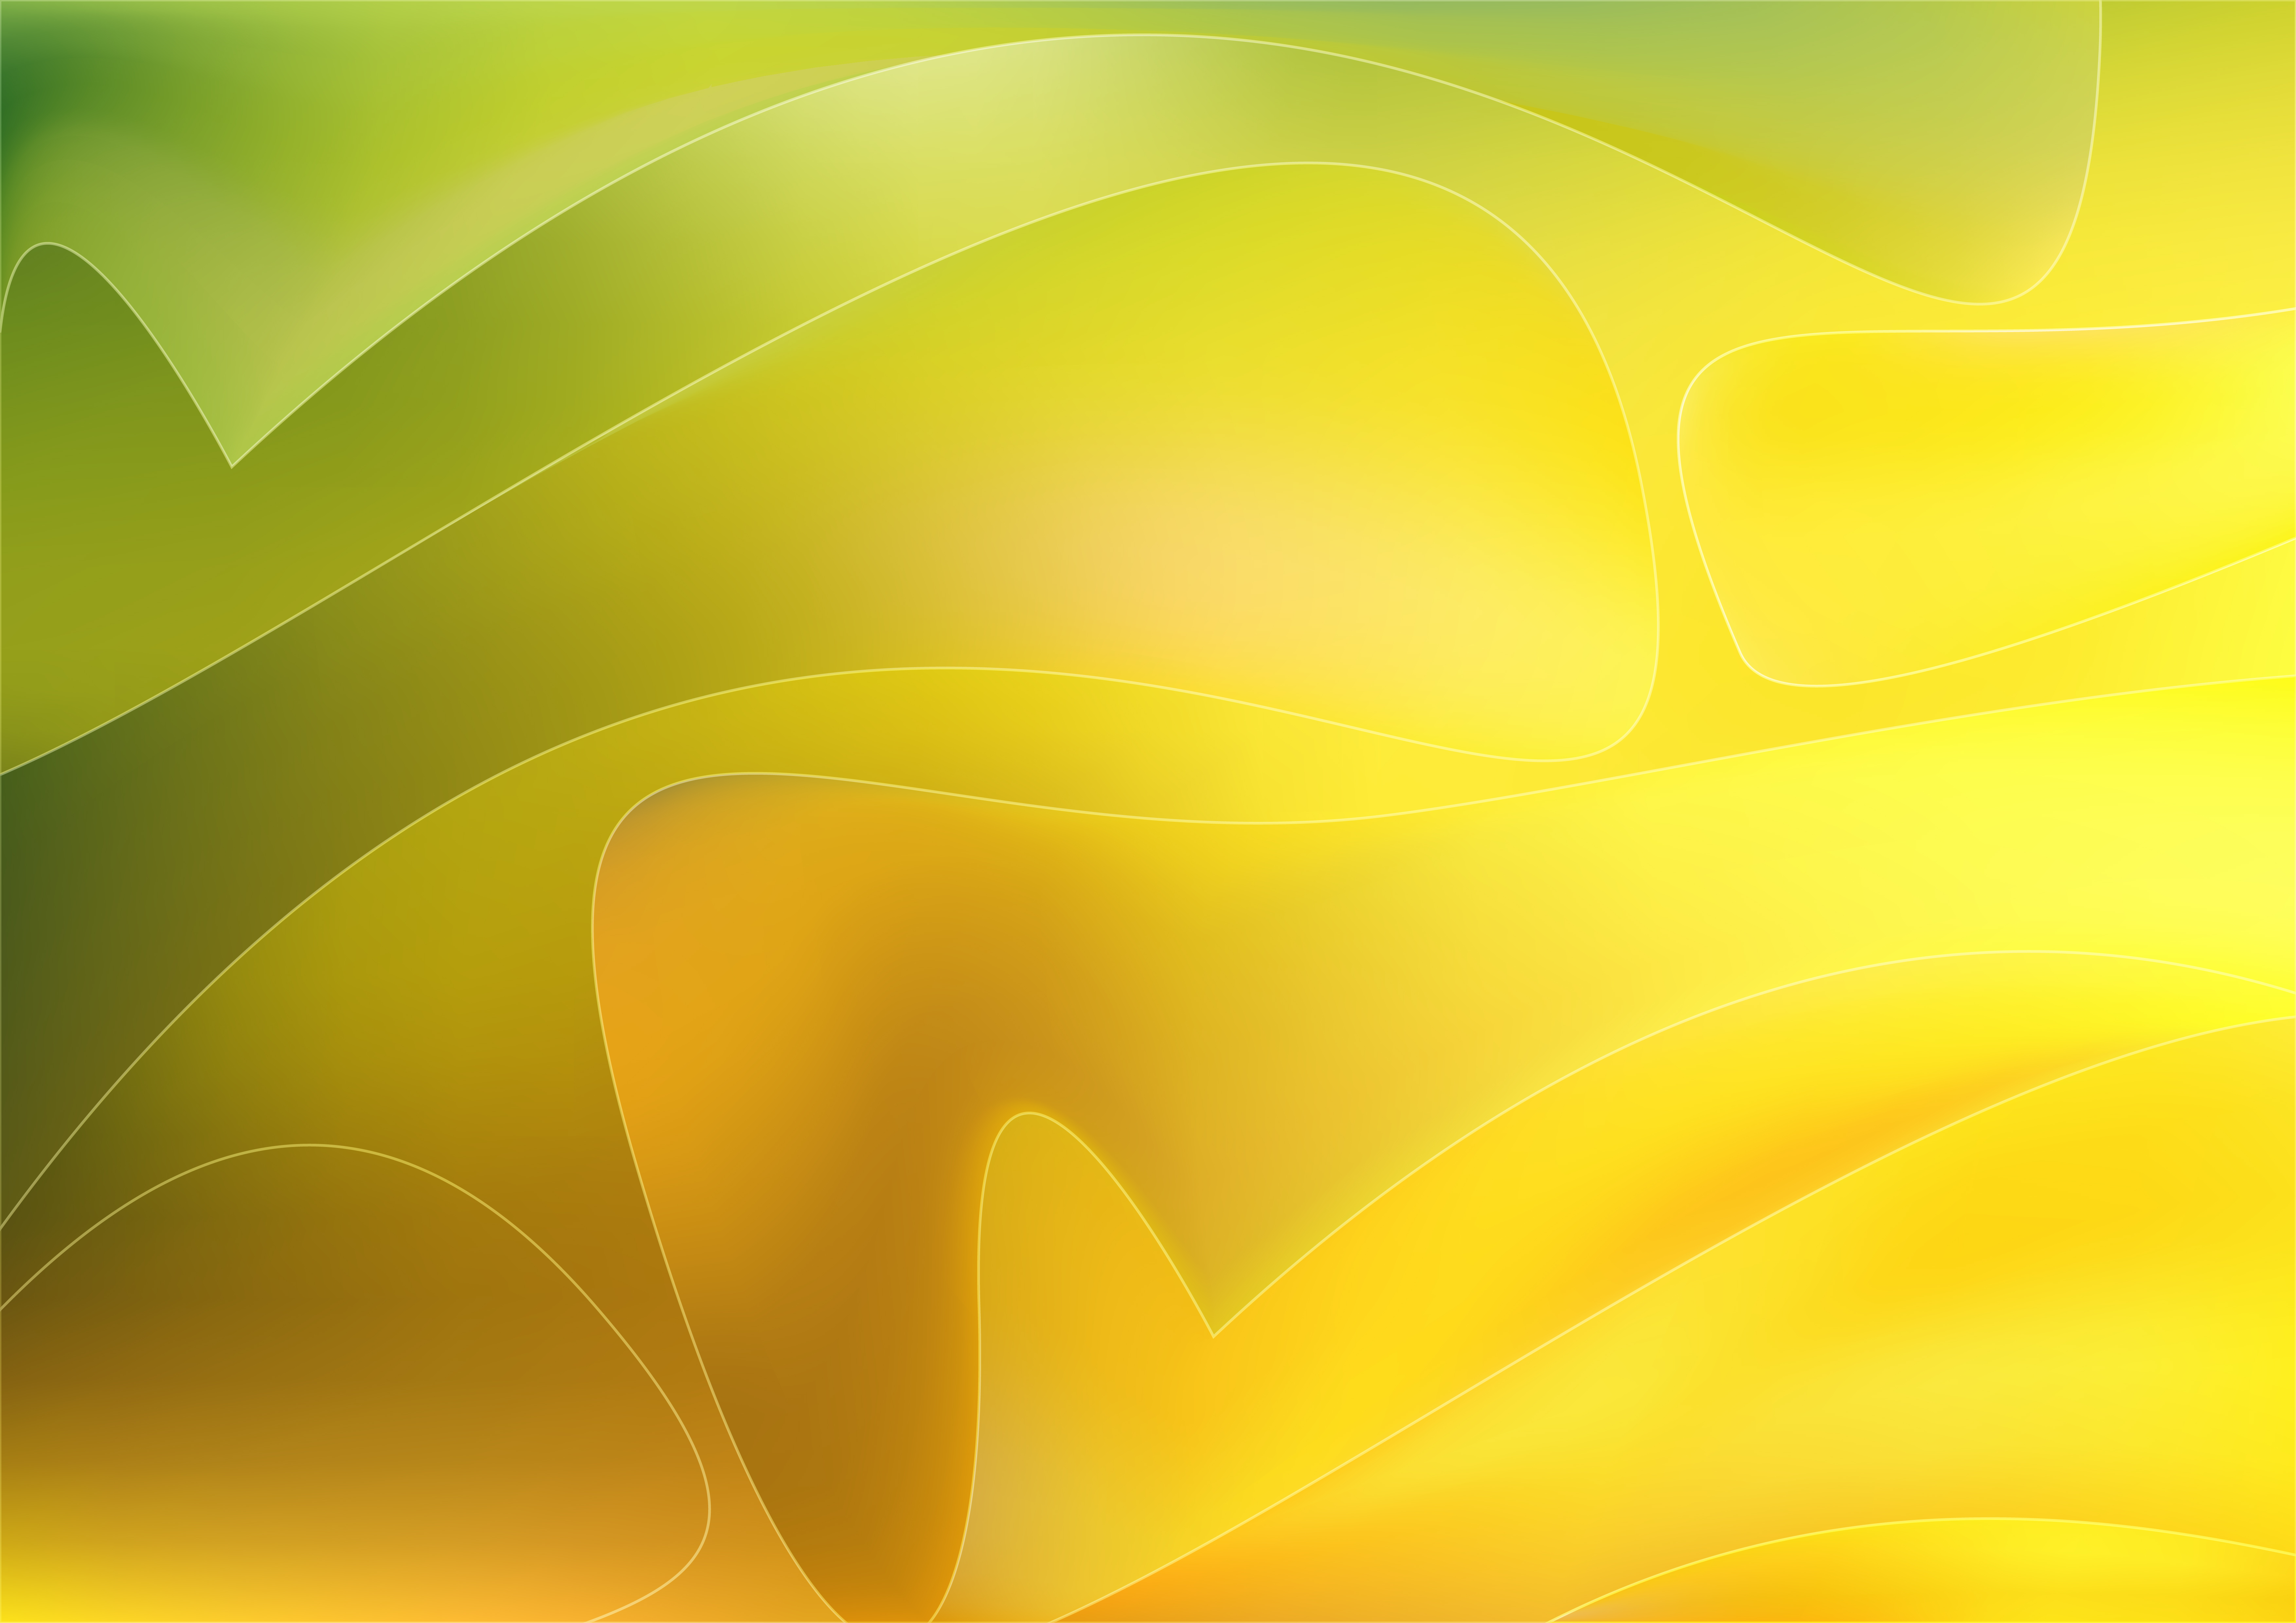 Free Abstract Orange Yellow and Green Background